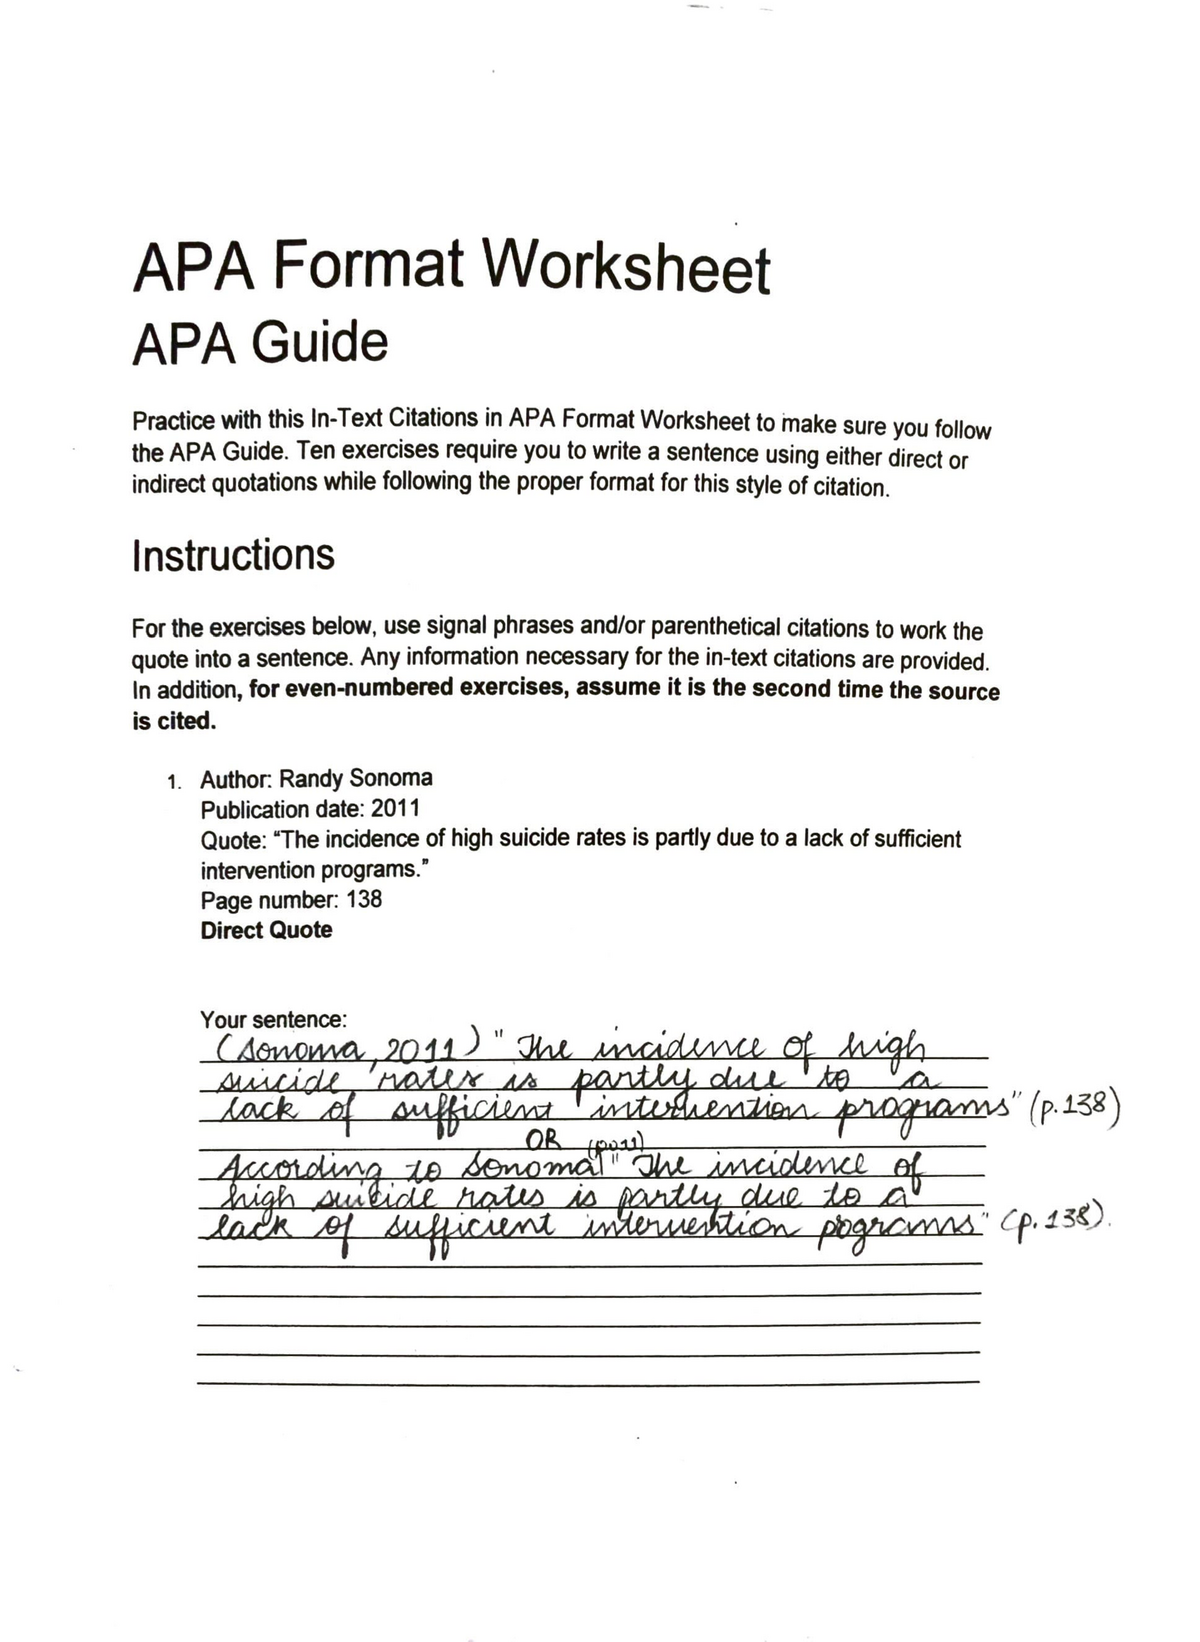 apa in text citation quiz answers